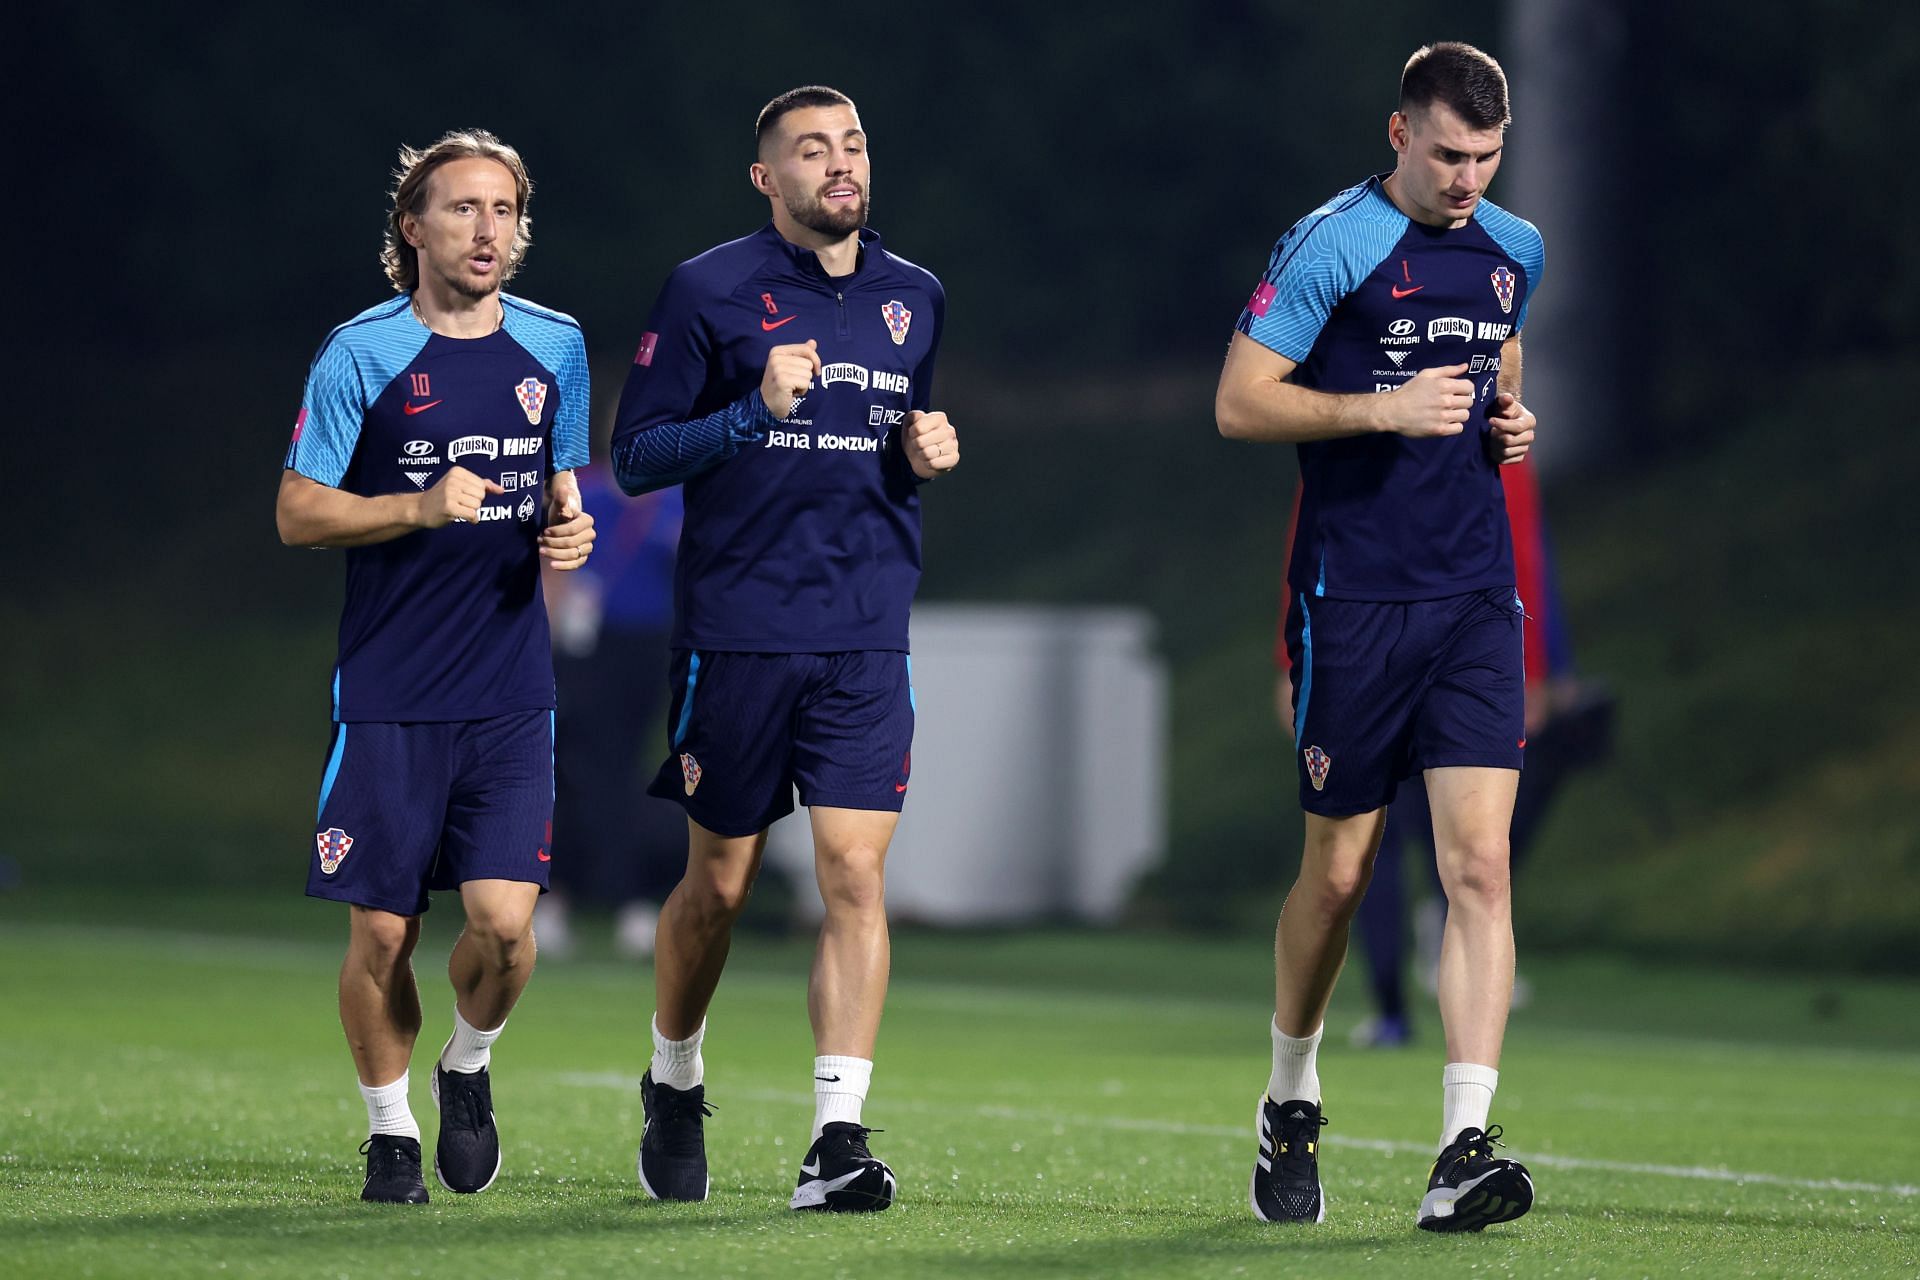 Croatia Press Conference and Training Session - FIFA World Cup Qatar 2022